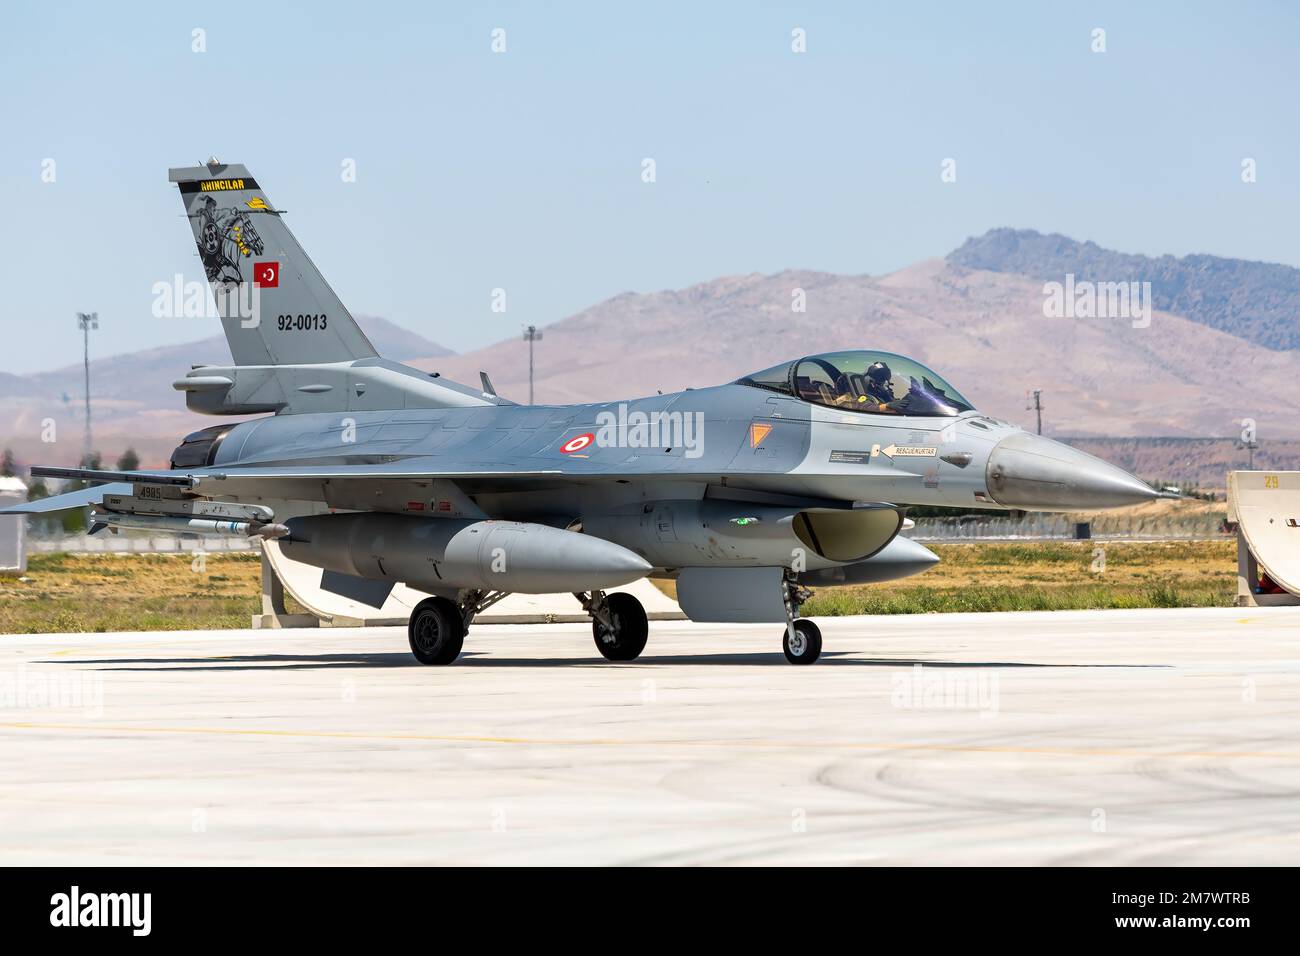 Konya, Turkey - 07 01 2021: Anatolian Eagle Air Force Exercise 2021  F16 Fighter jet in a taxiing position in Turkey. Stock Photo